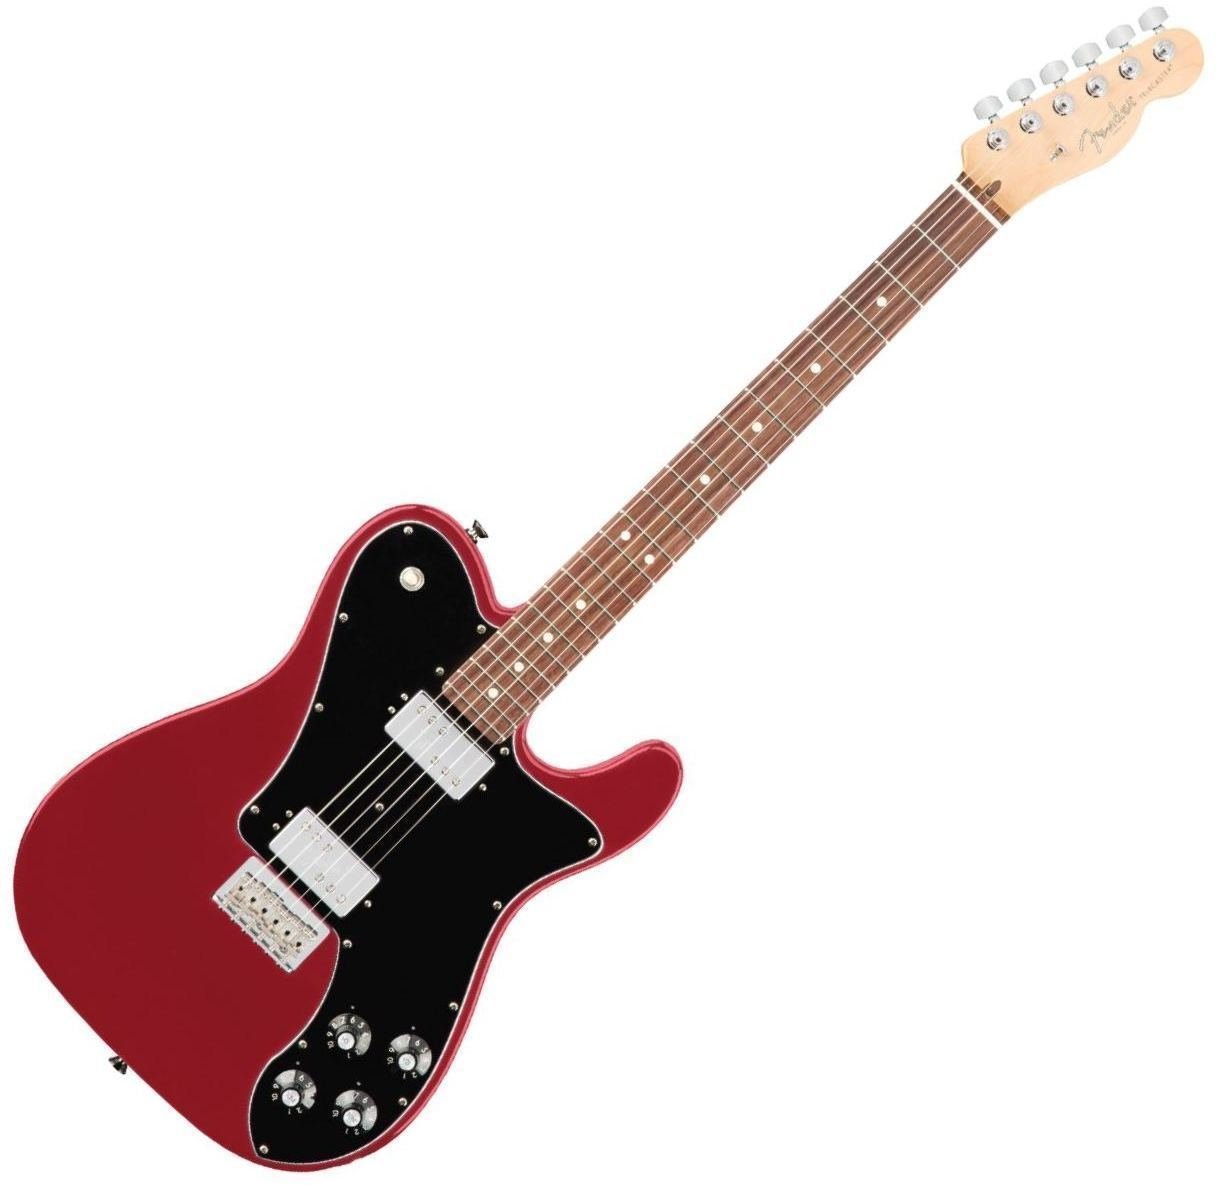 Electric guitar Fender American Pro Telecaster Deluxe ShawBucker RW Candy Apple Red